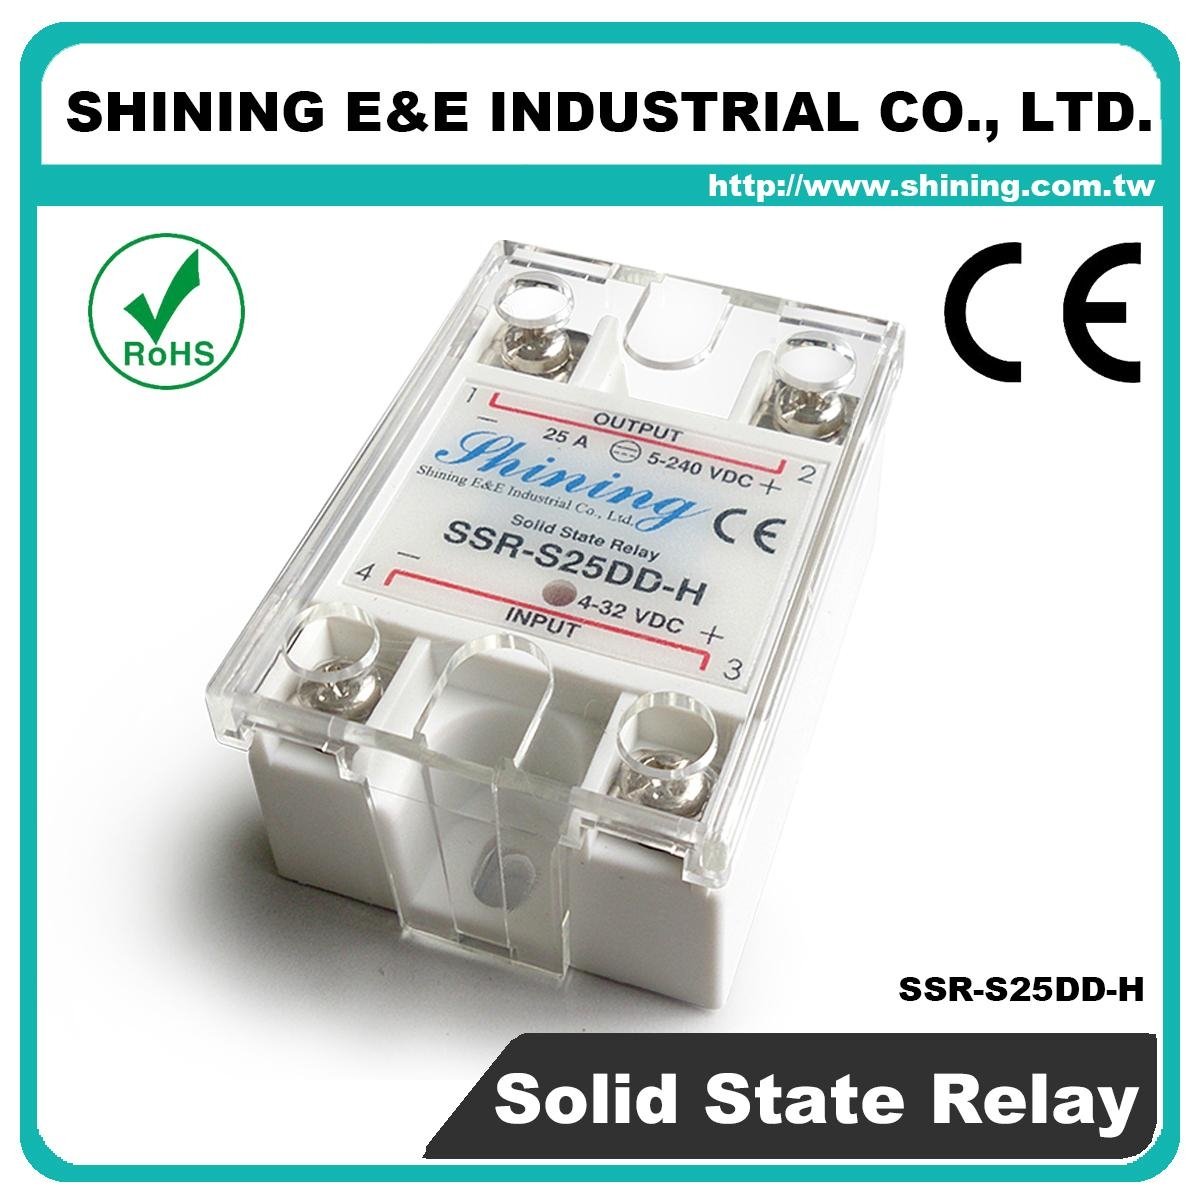 SSR-S25DD-H DC to DC 單相固態繼電器 Solid State Relay 5